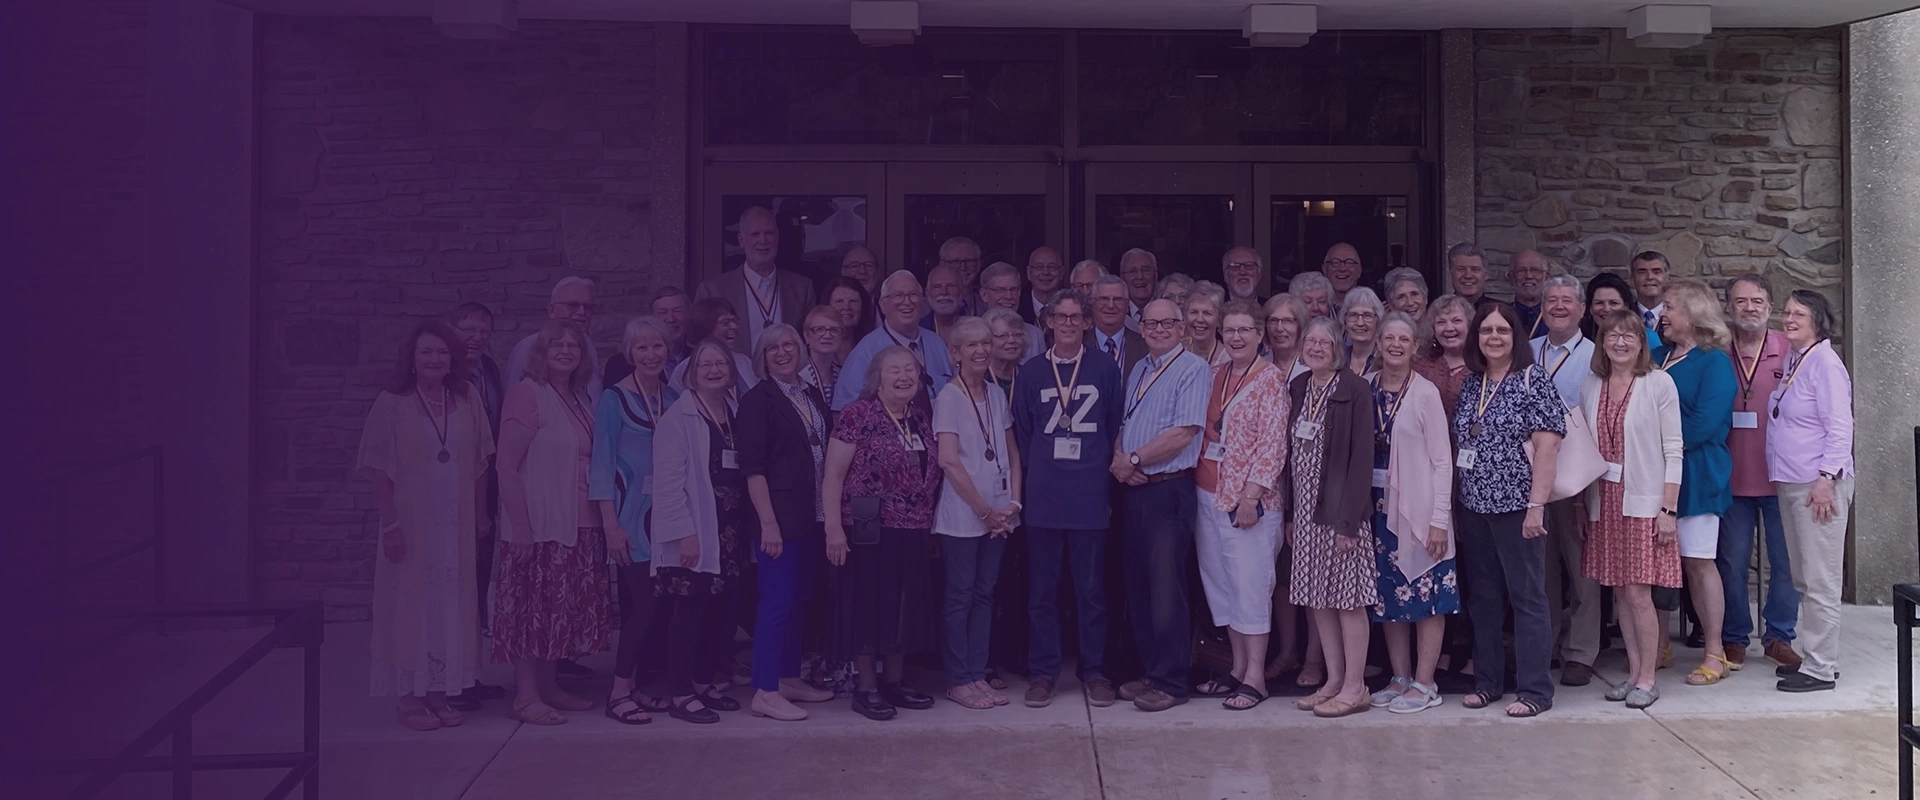 Houghton Class of 1972 standing together in front of the Campus Center.